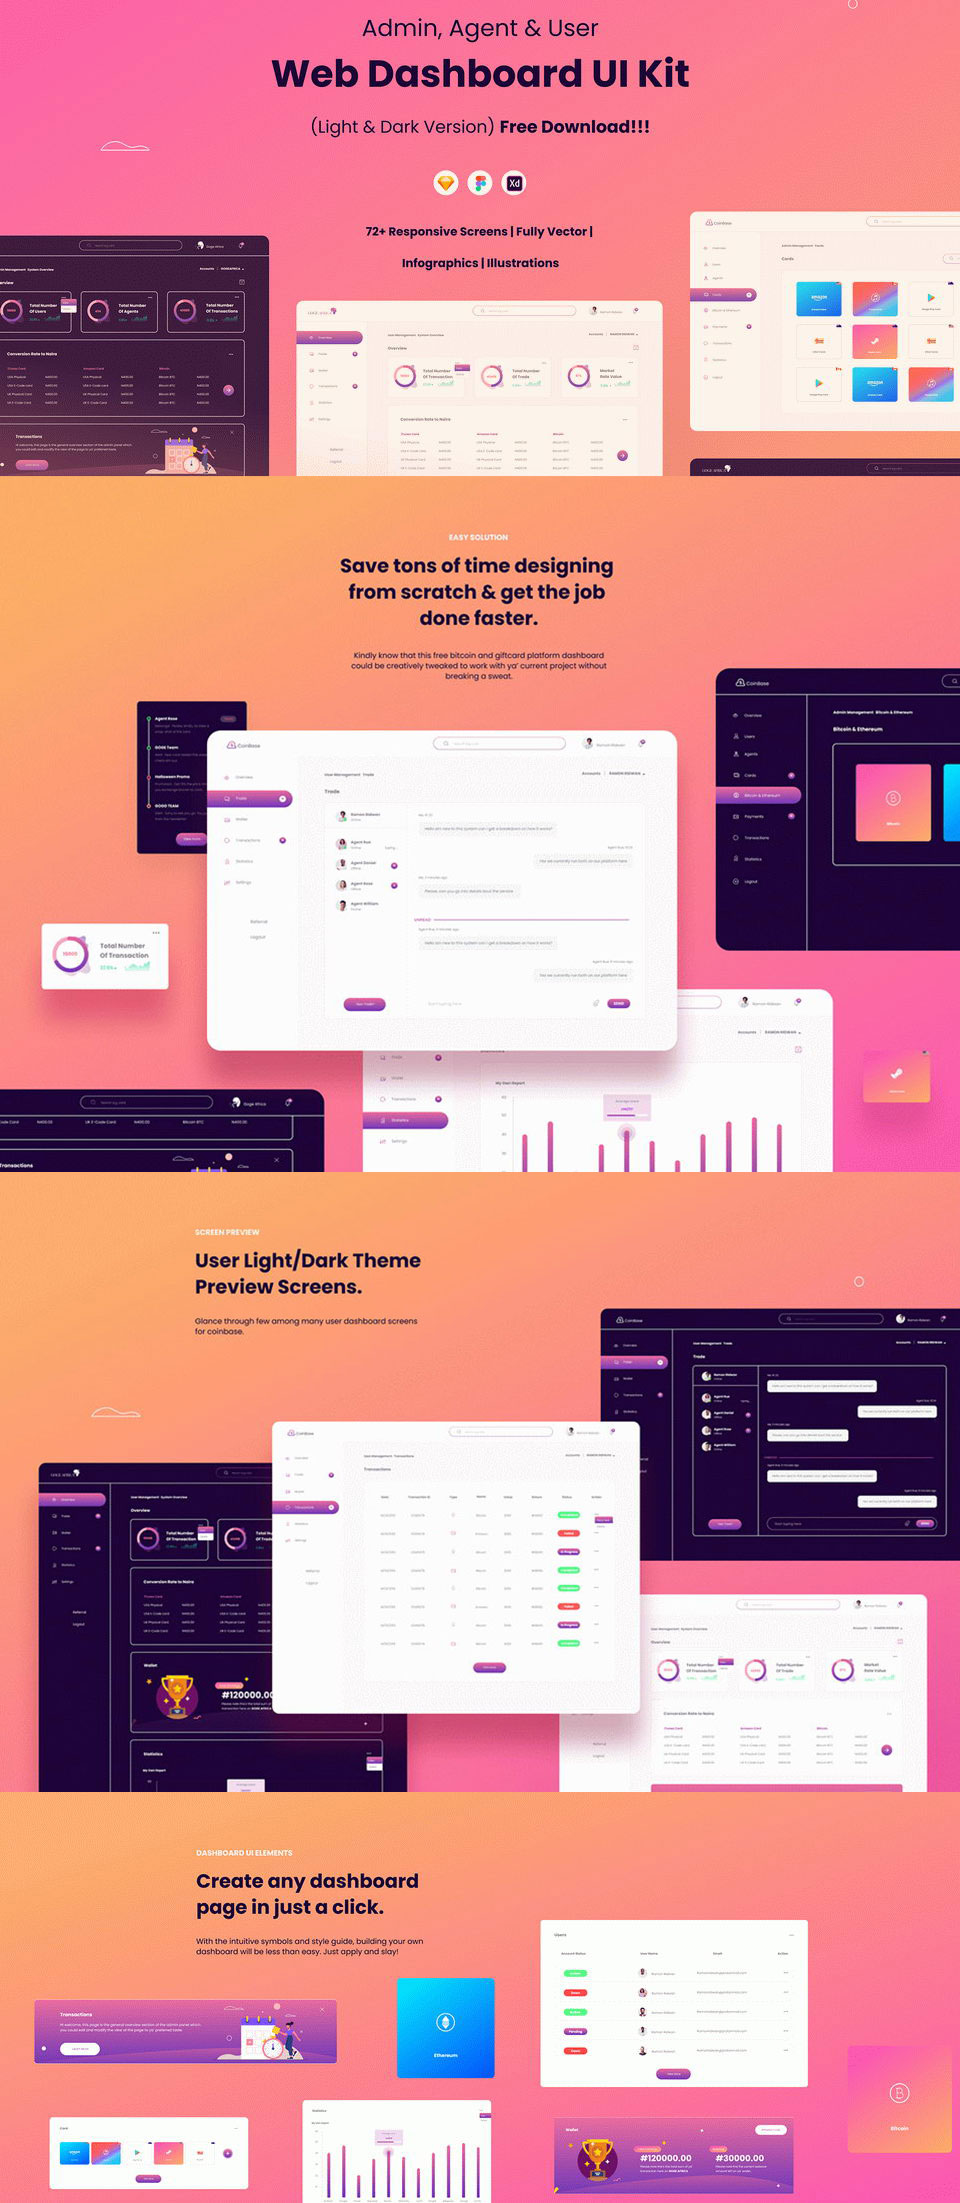 Top 6 UI Kit Admin Dashboard Templates For Figma and Sketch